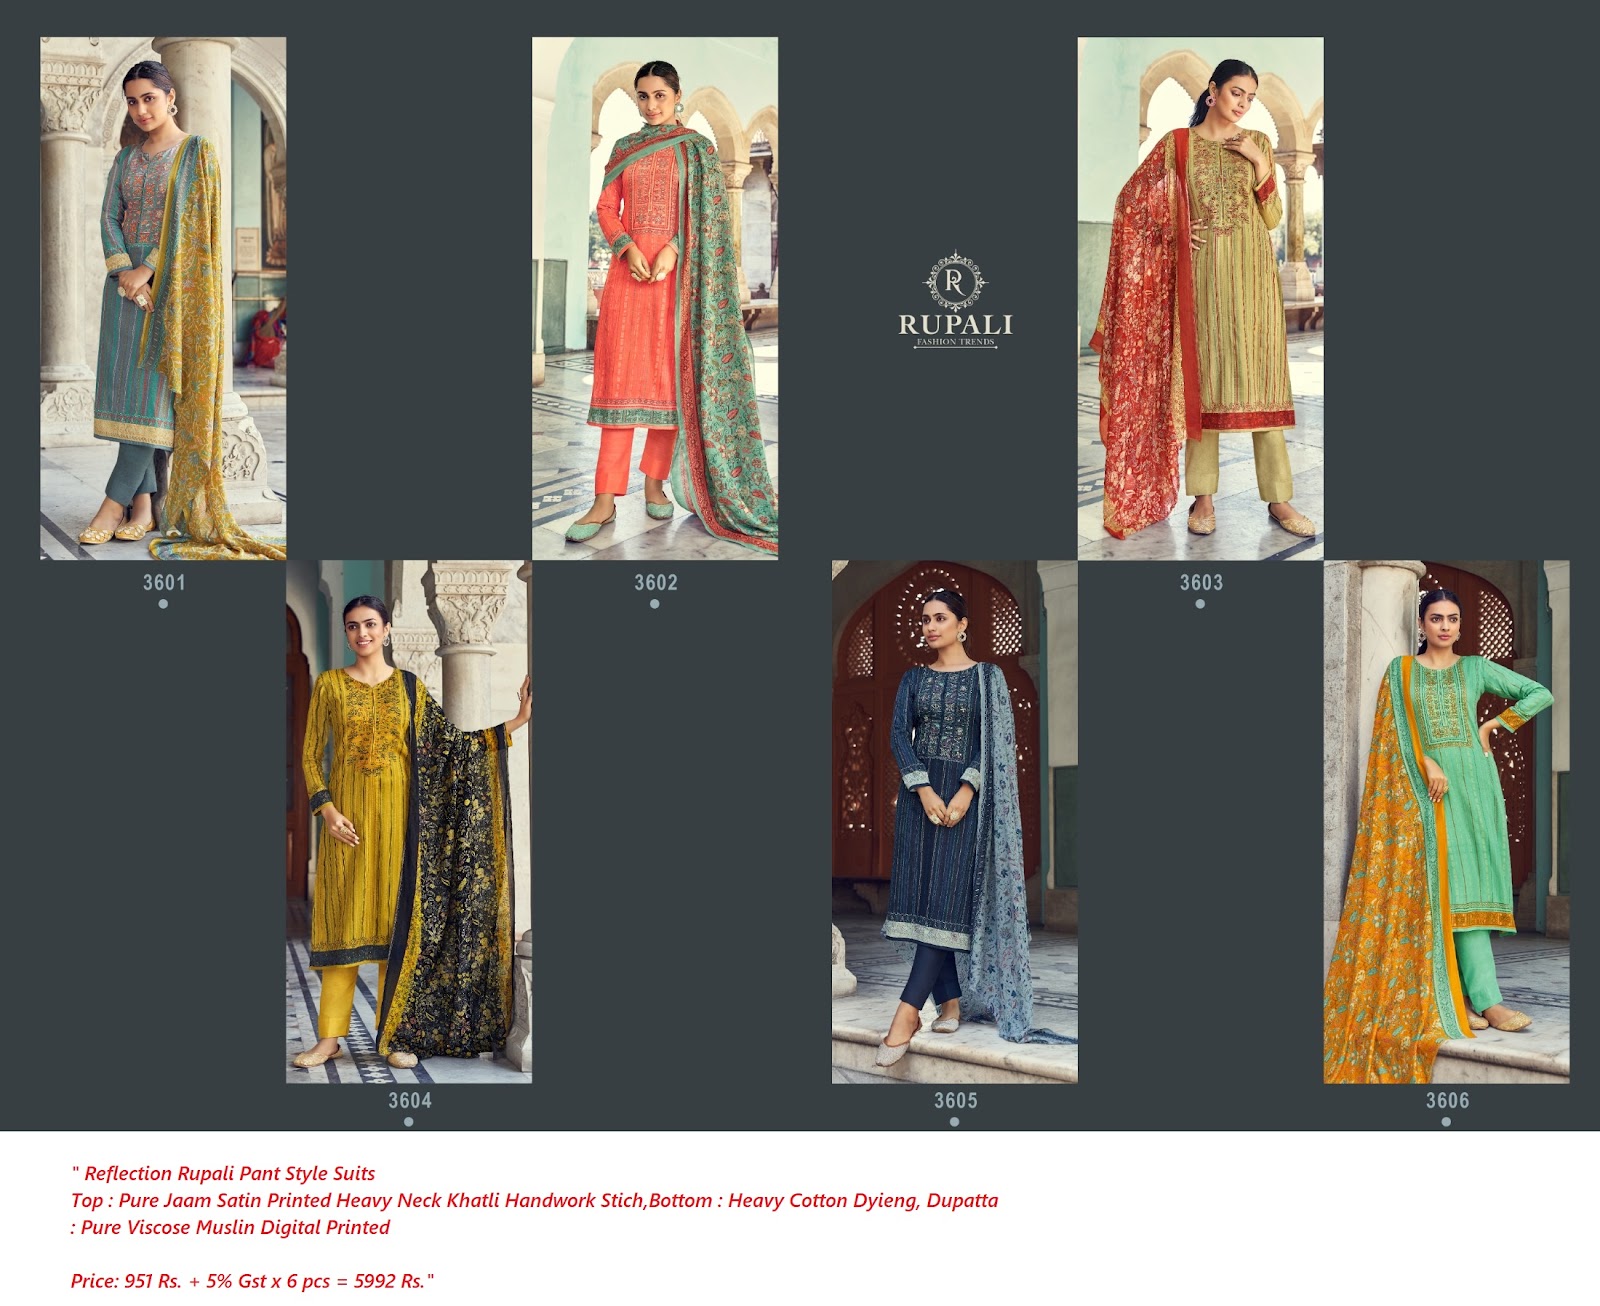 Buy Jaam Satin Handwork Reflection Rupali Pant Style Suits C